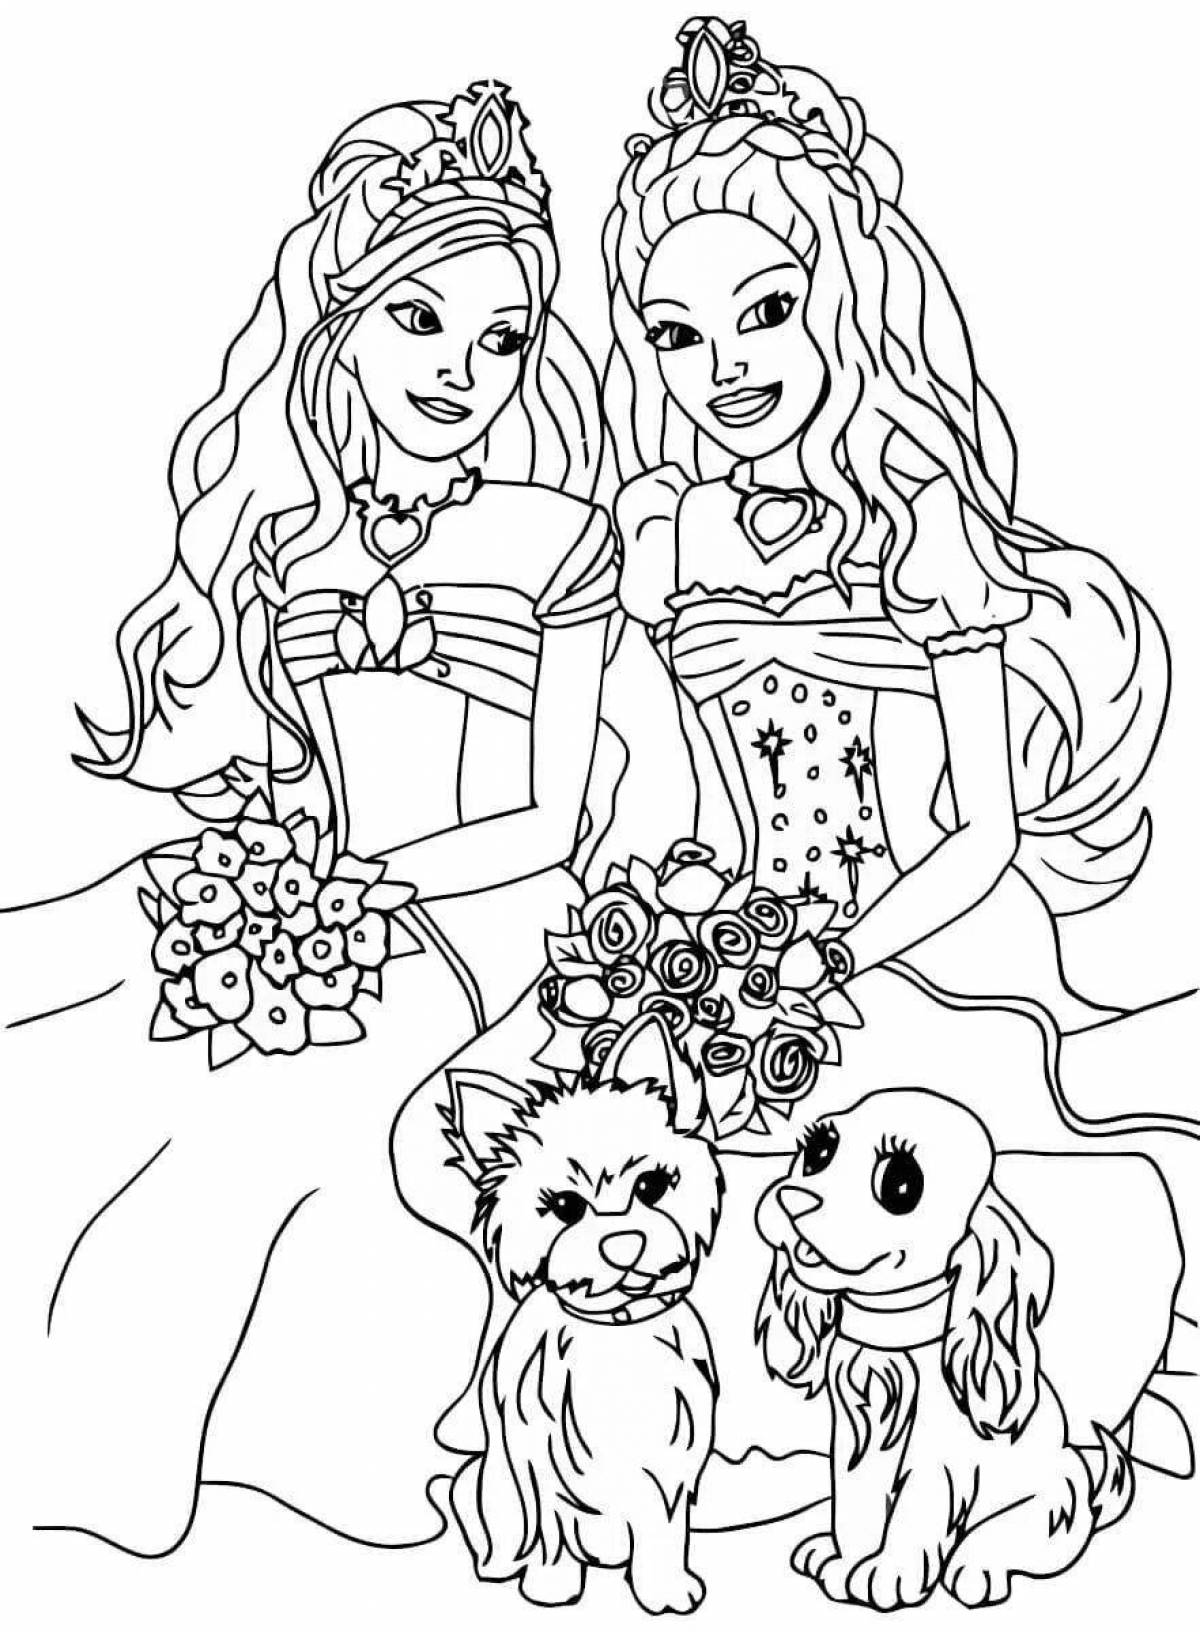 Elegant coloring book for girls 8-10 years old